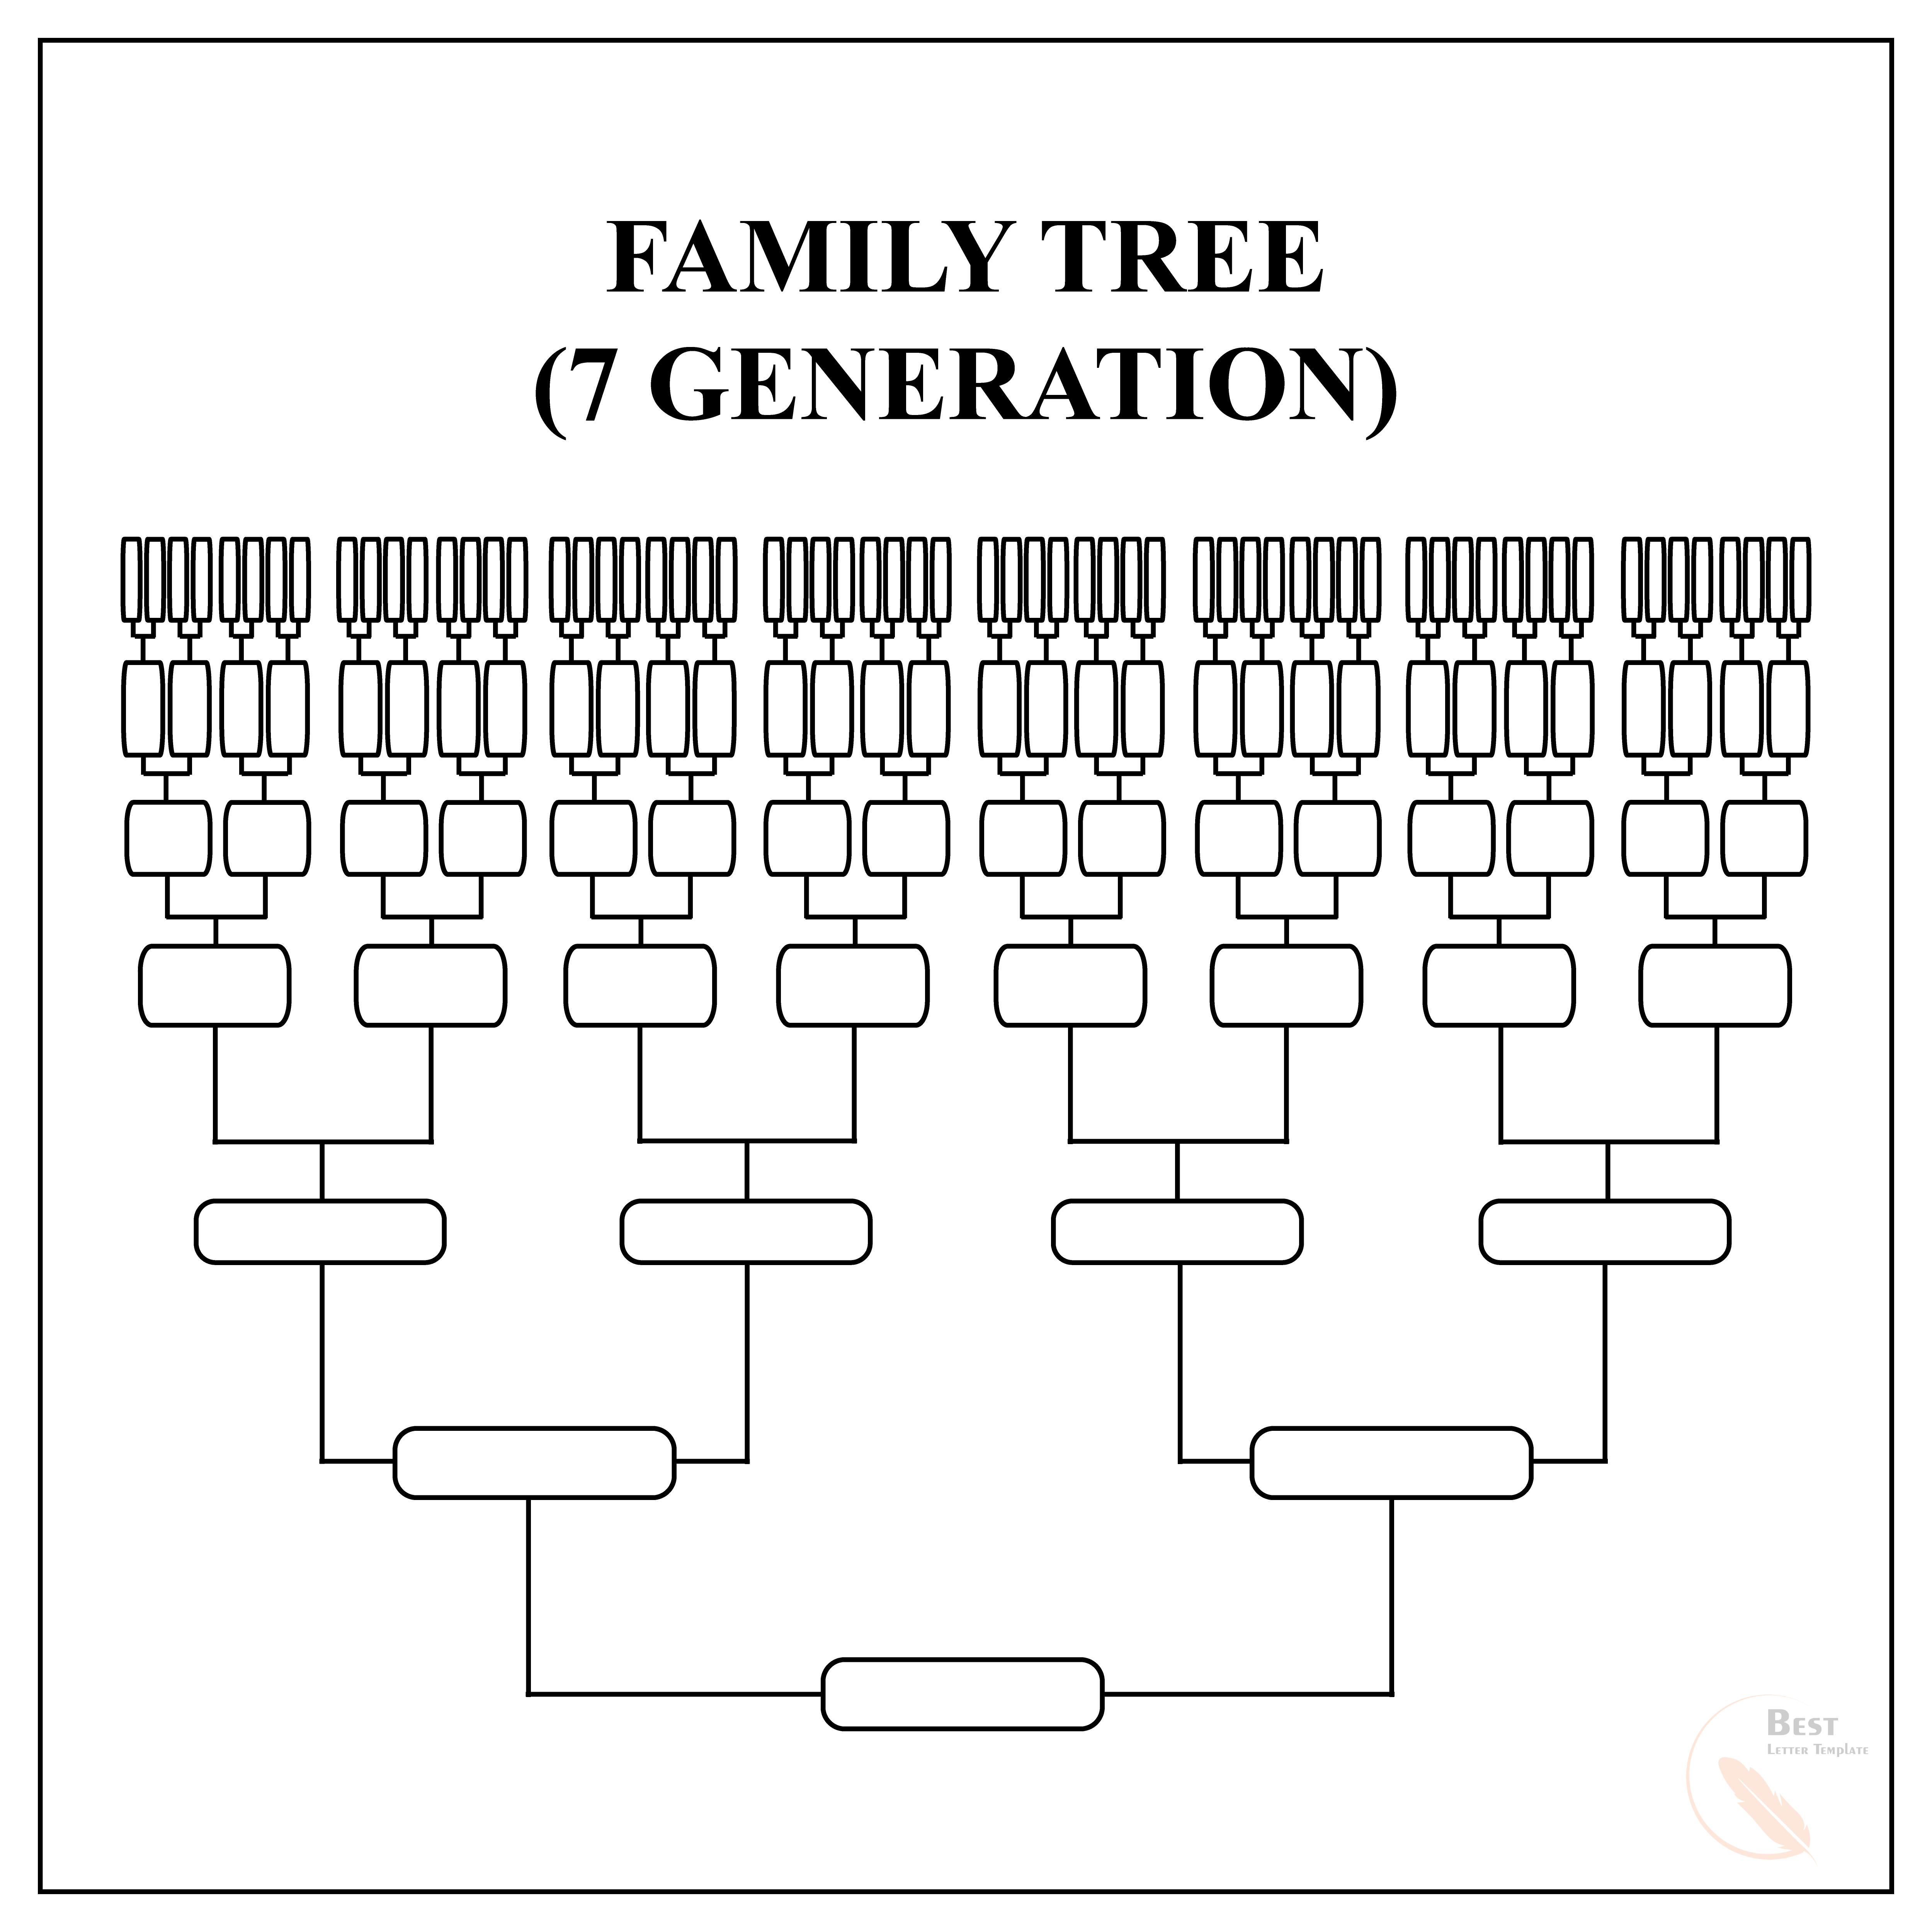 Family Tree Template for 7 Generation